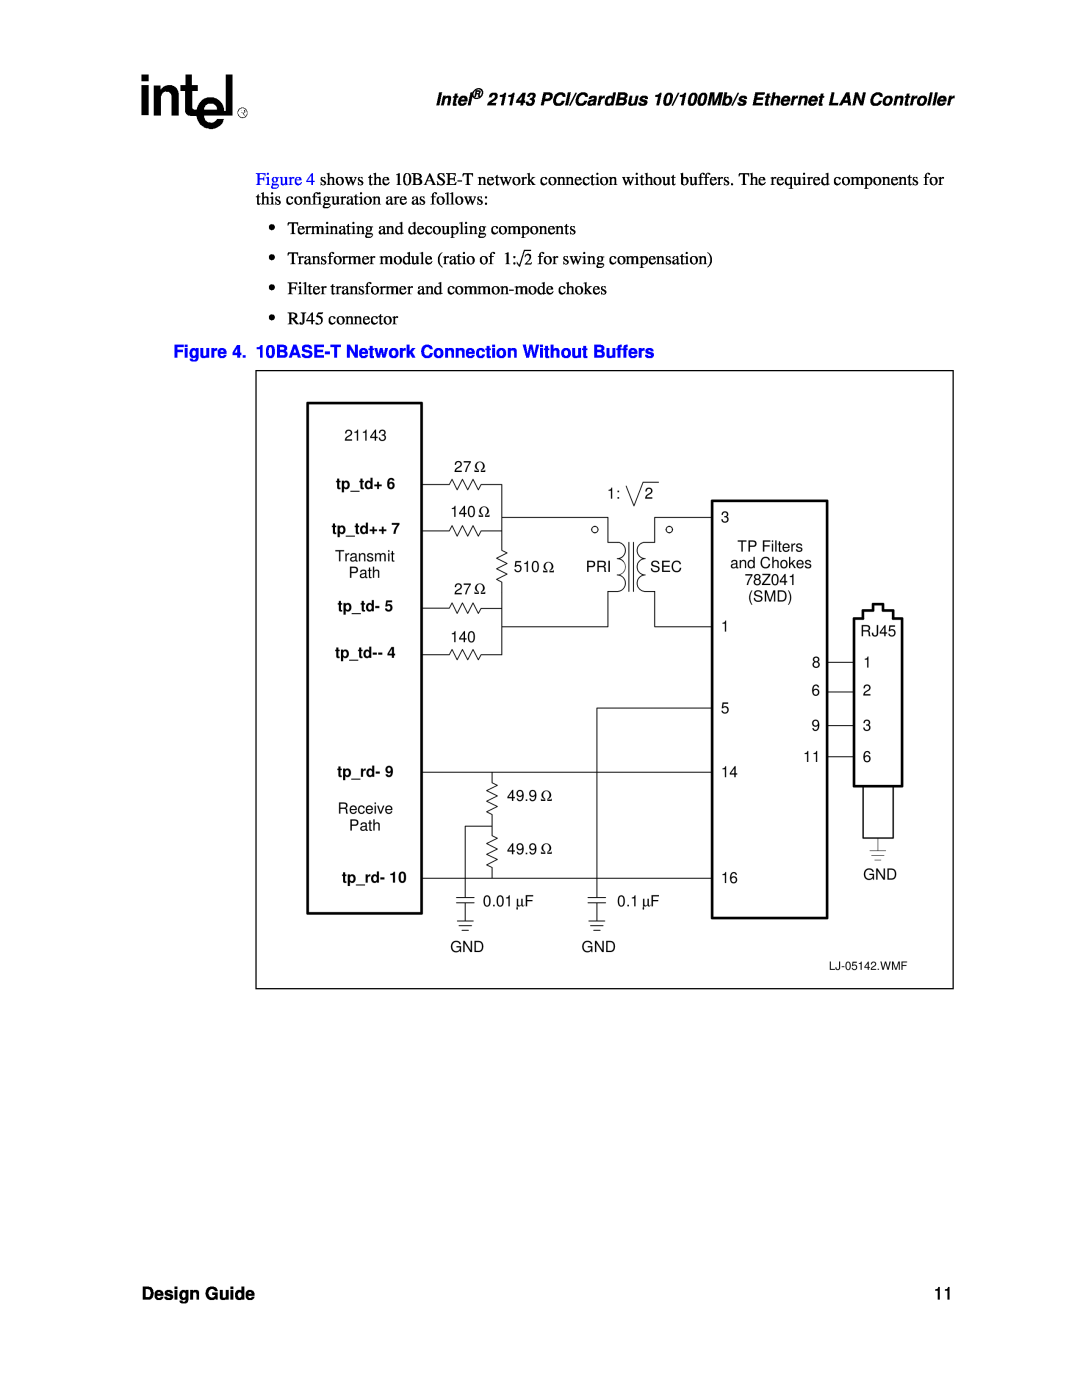 Intel manual 10BASE-T Network Connection Without Buffers, Intel 21143 PCI/CardBus 10/100Mb/s Ethernet LAN Controller 